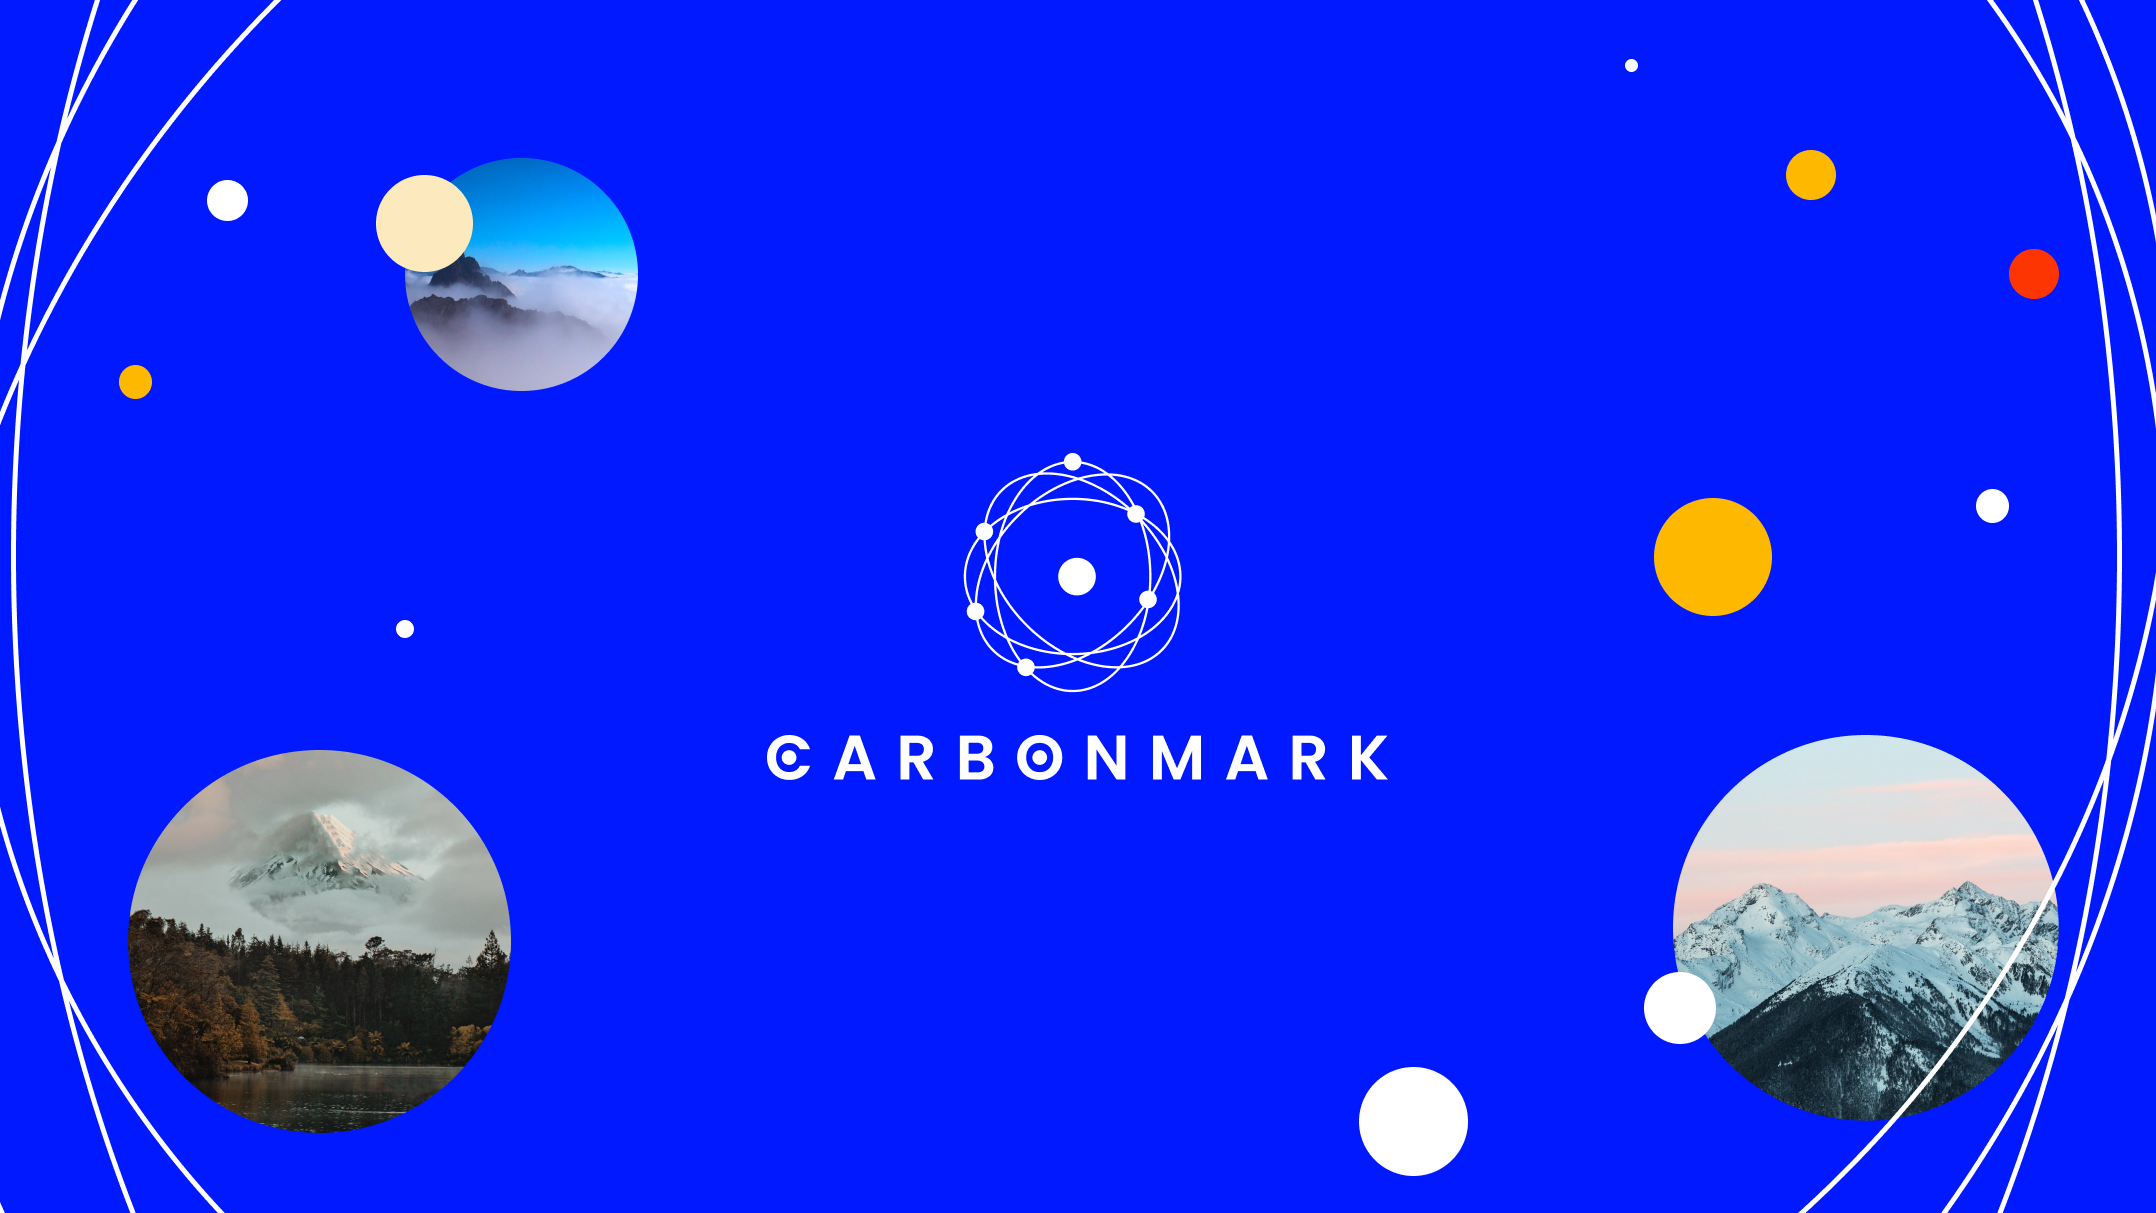 How to create and edit your Carbonmark profile